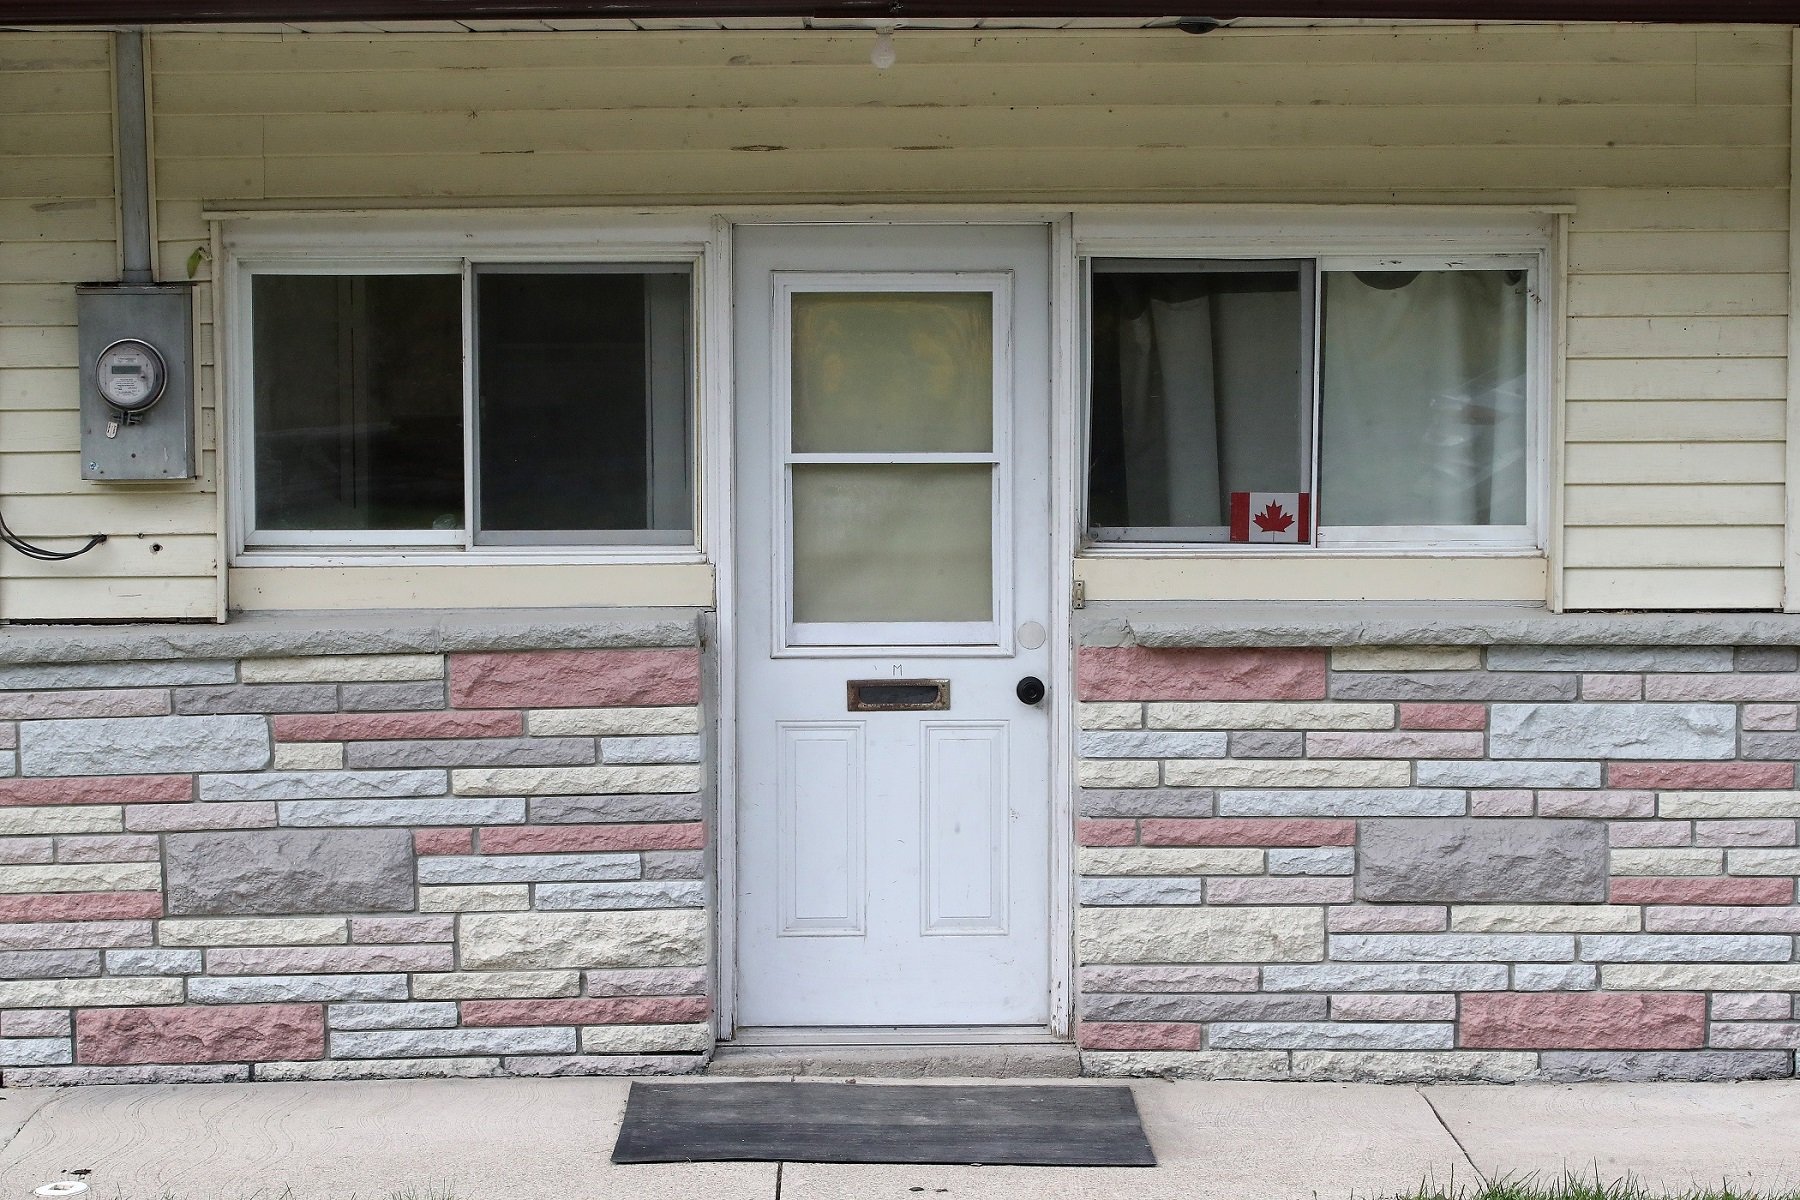 An outside view of the building used as The Rosebud Motel in Schitt's Creek 